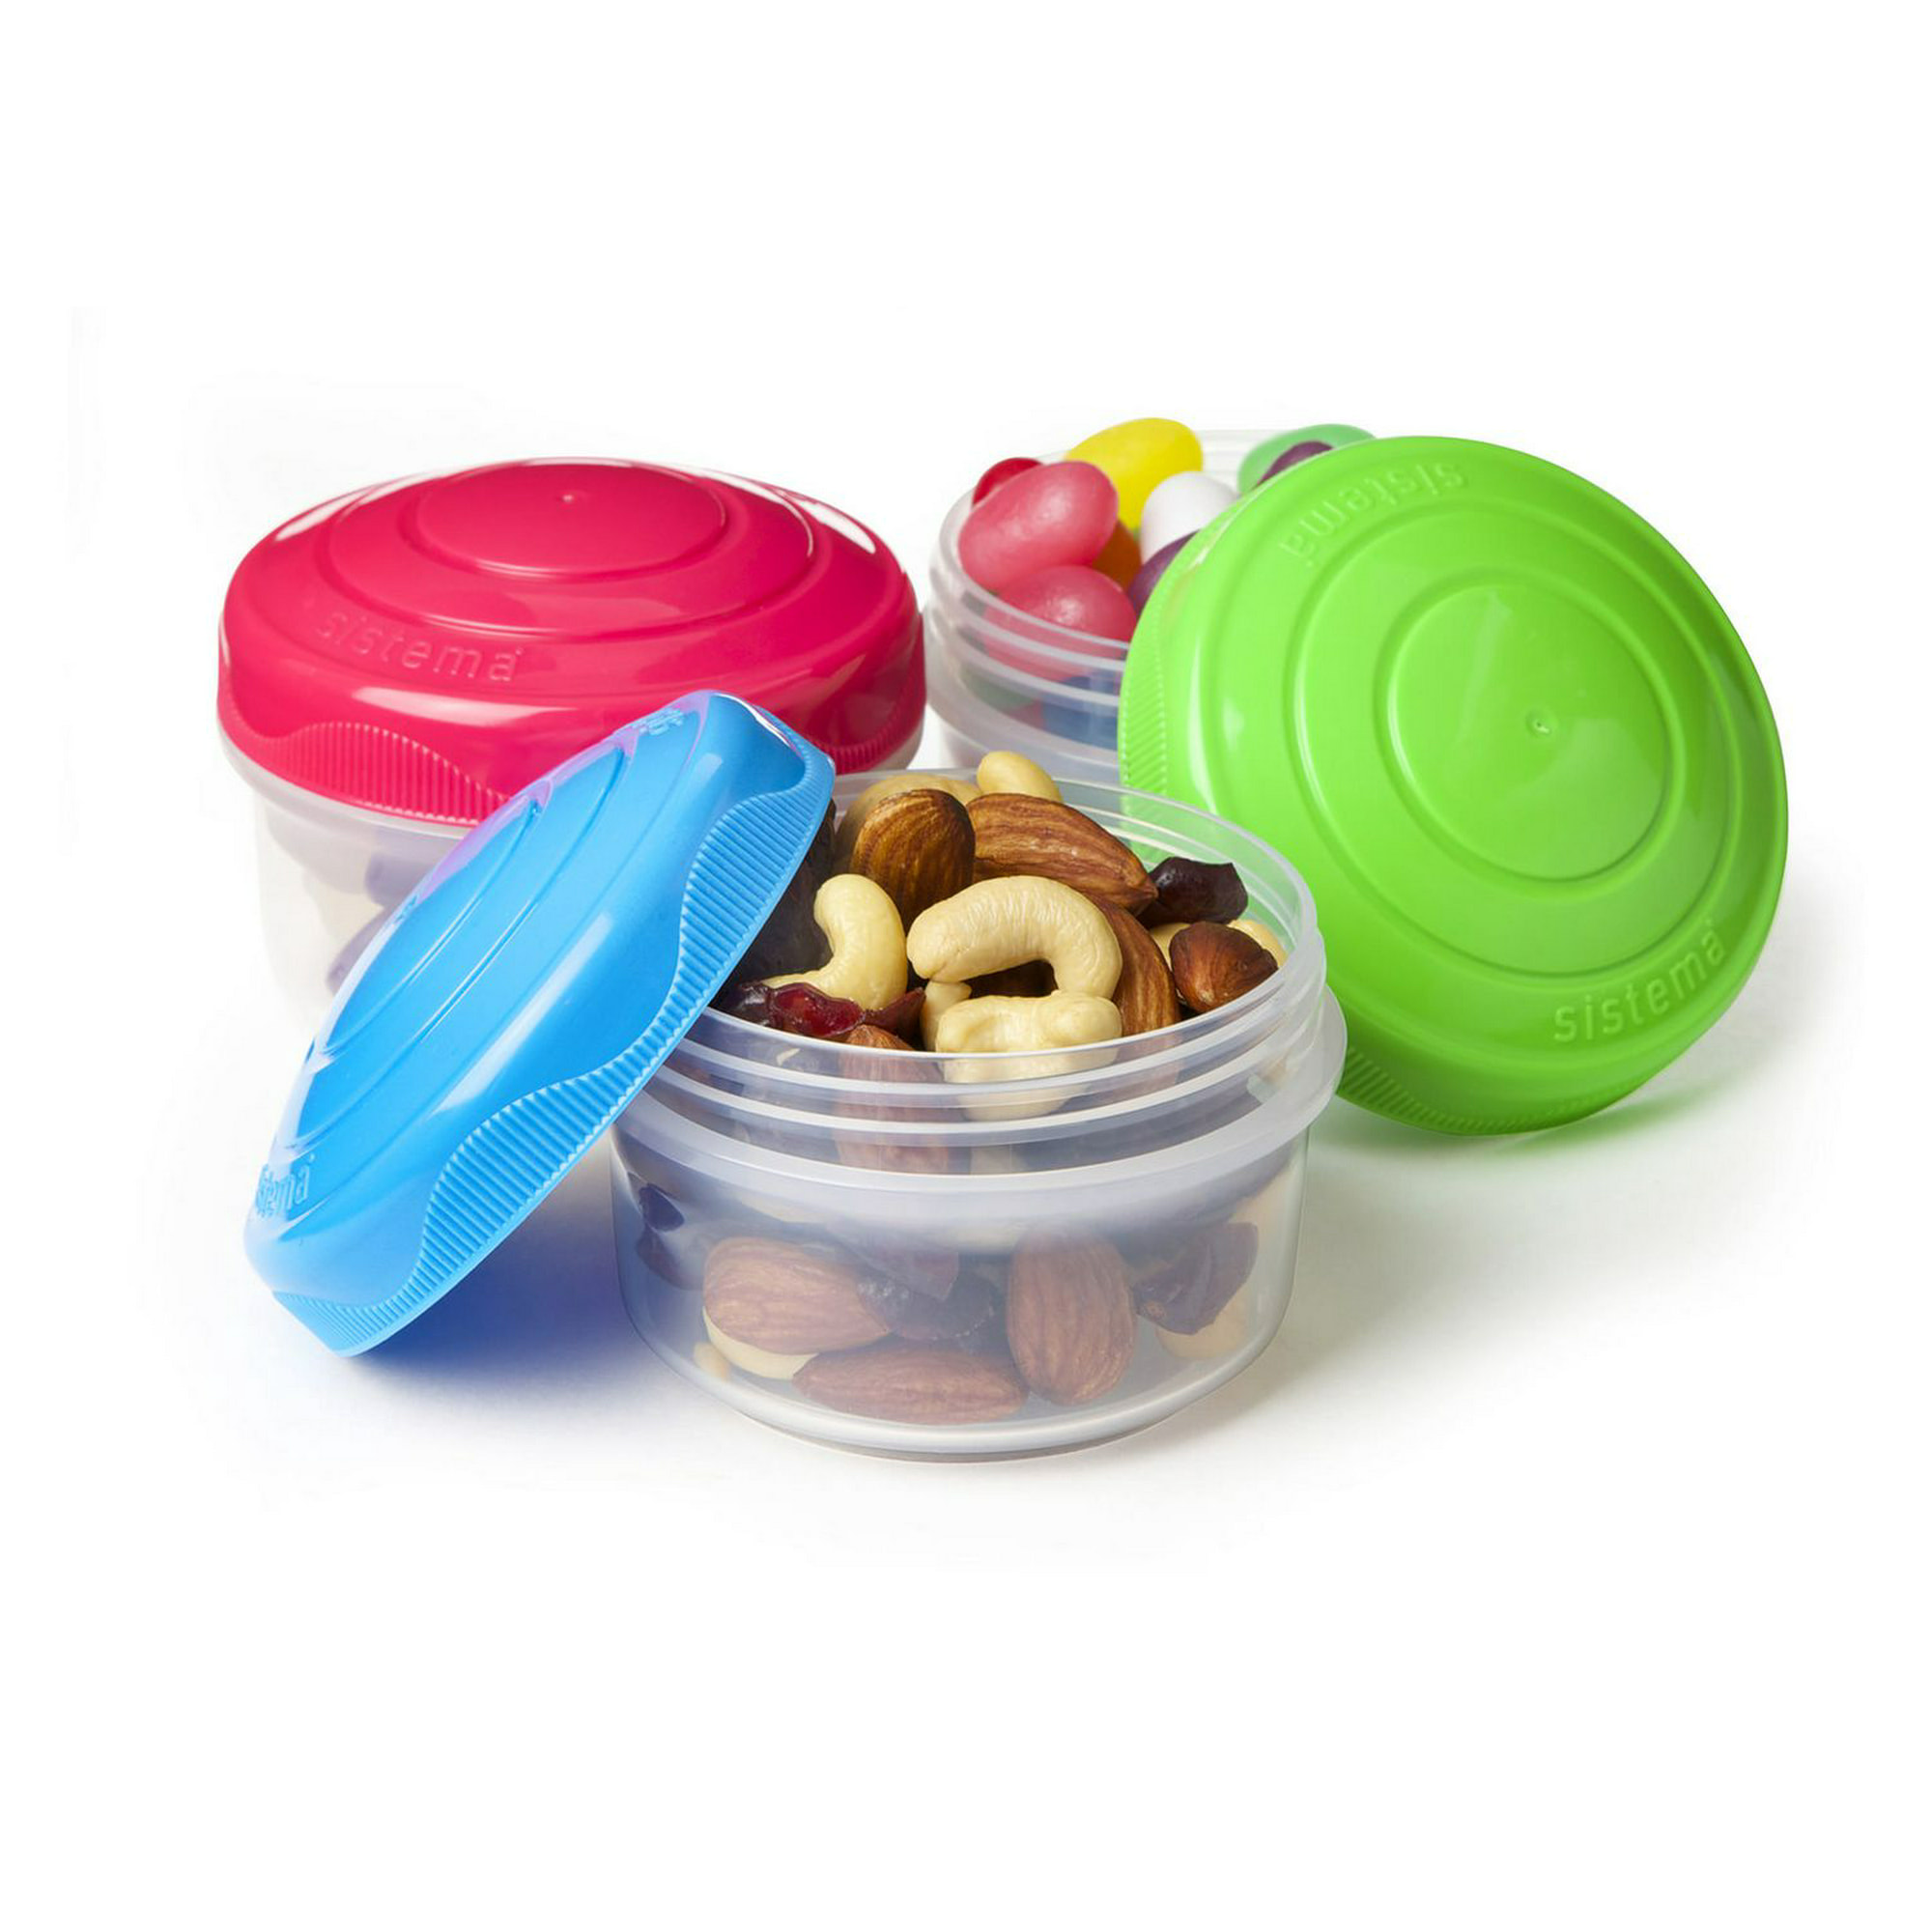 Rubbermaid Sistema Small Mini Bites Snack Containers, 3 Count, 130ml,  Assorted Colors, Set of 3 